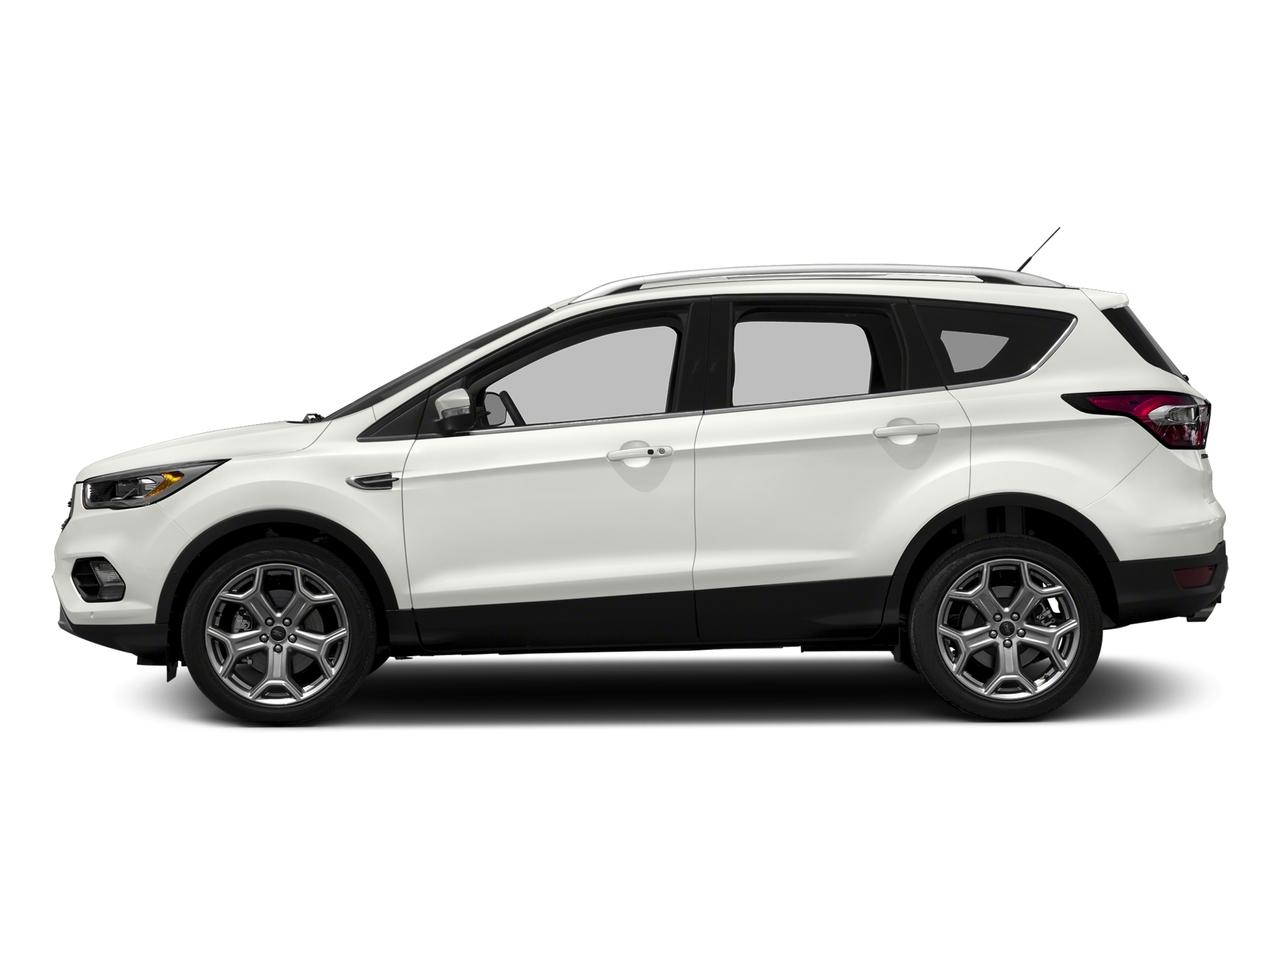 Used 2018 Ford Escape Titanium with VIN 1FMCU9J95JUD60275 for sale in Winslow, AZ